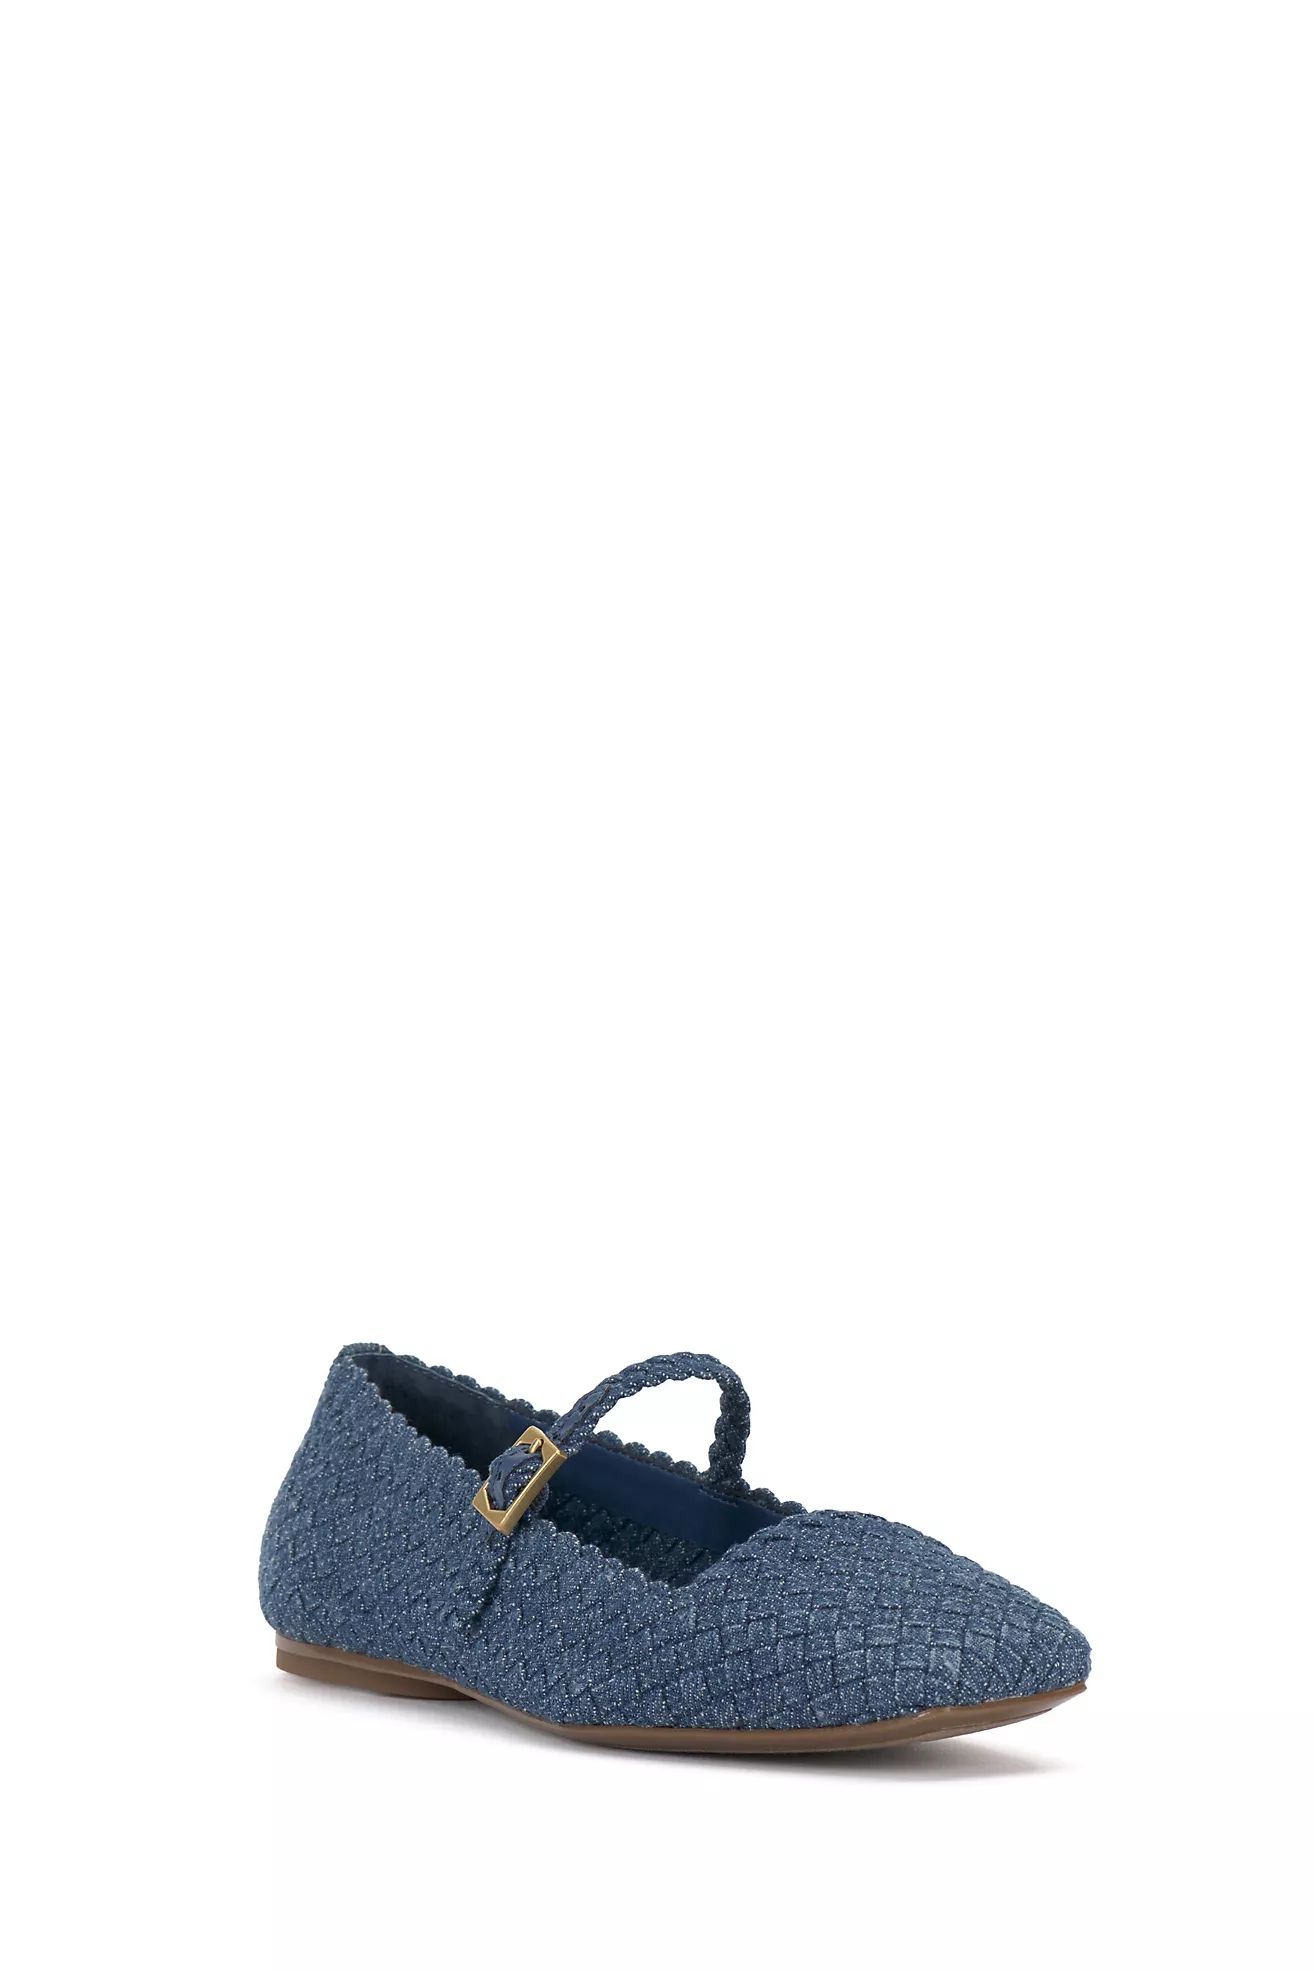 Vince Camuto Vinley Woven Mary Jane Flats | Anthropologie (US)